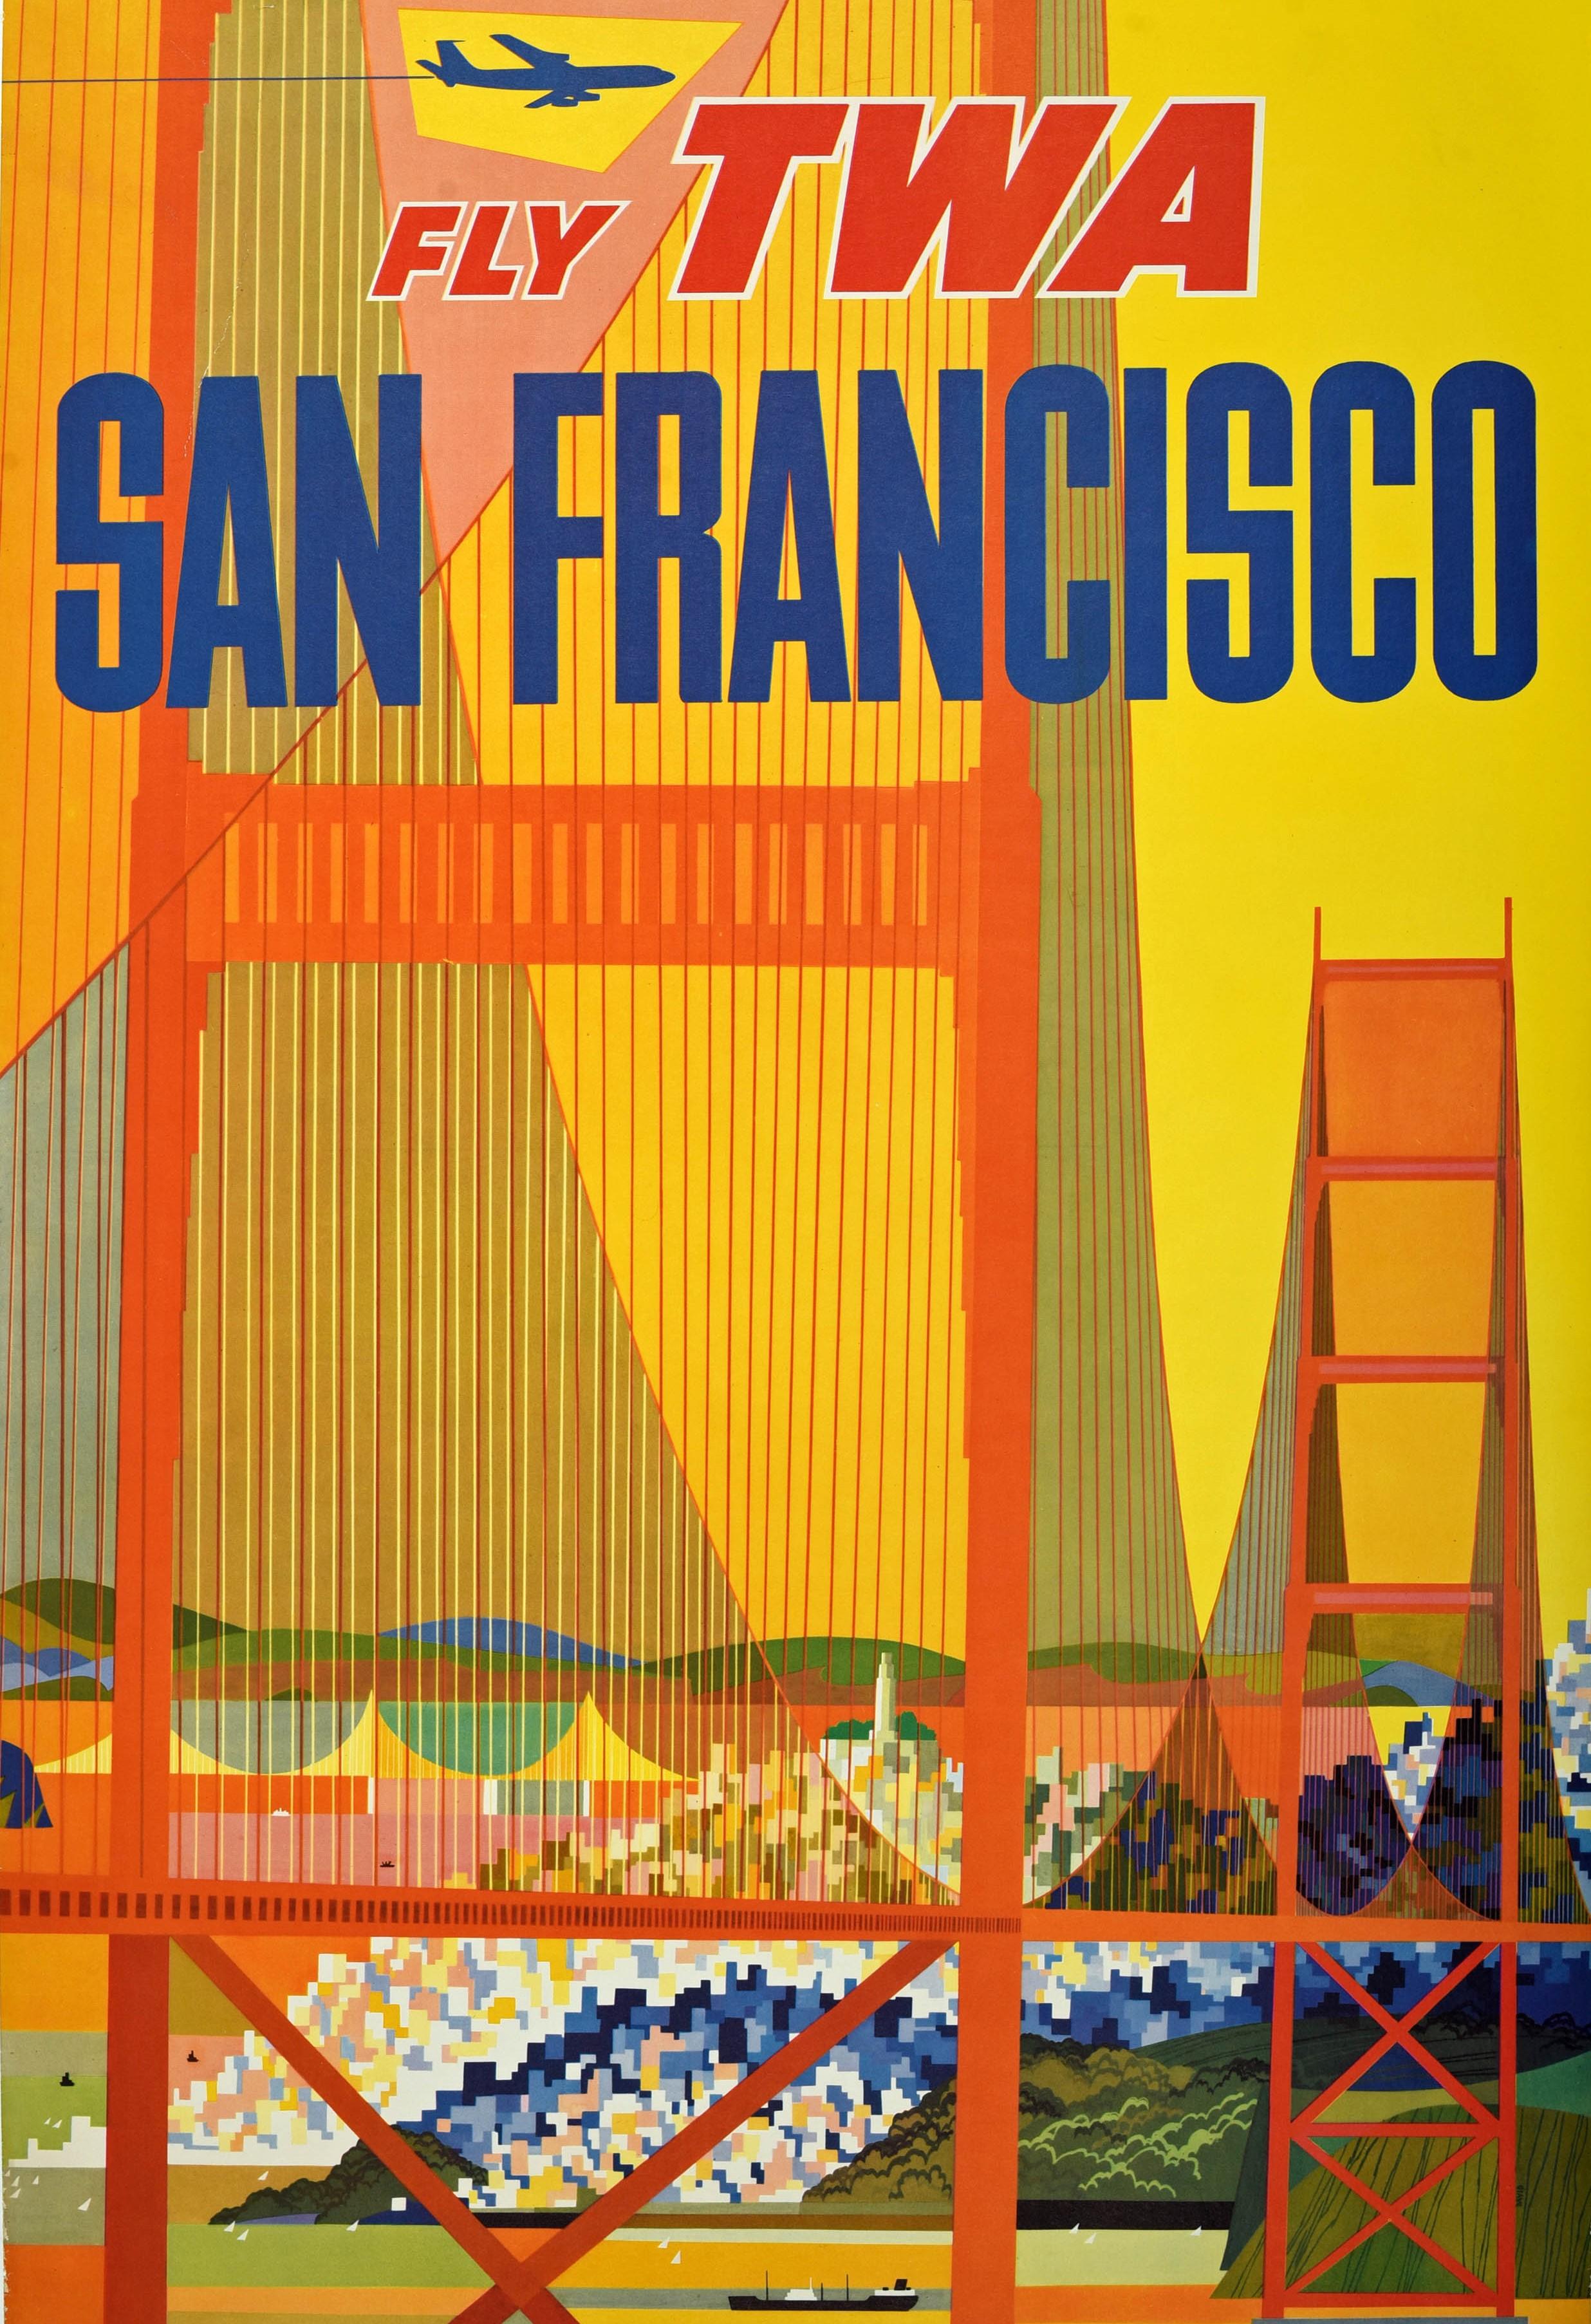 Original vintage travel poster - Fly TWA San Francisco - featuring a colourful view of a plane flying by the Golden Gate Bridge in California with sailing boats and a ship on the water and buildings behind the trees set against a yellow background,